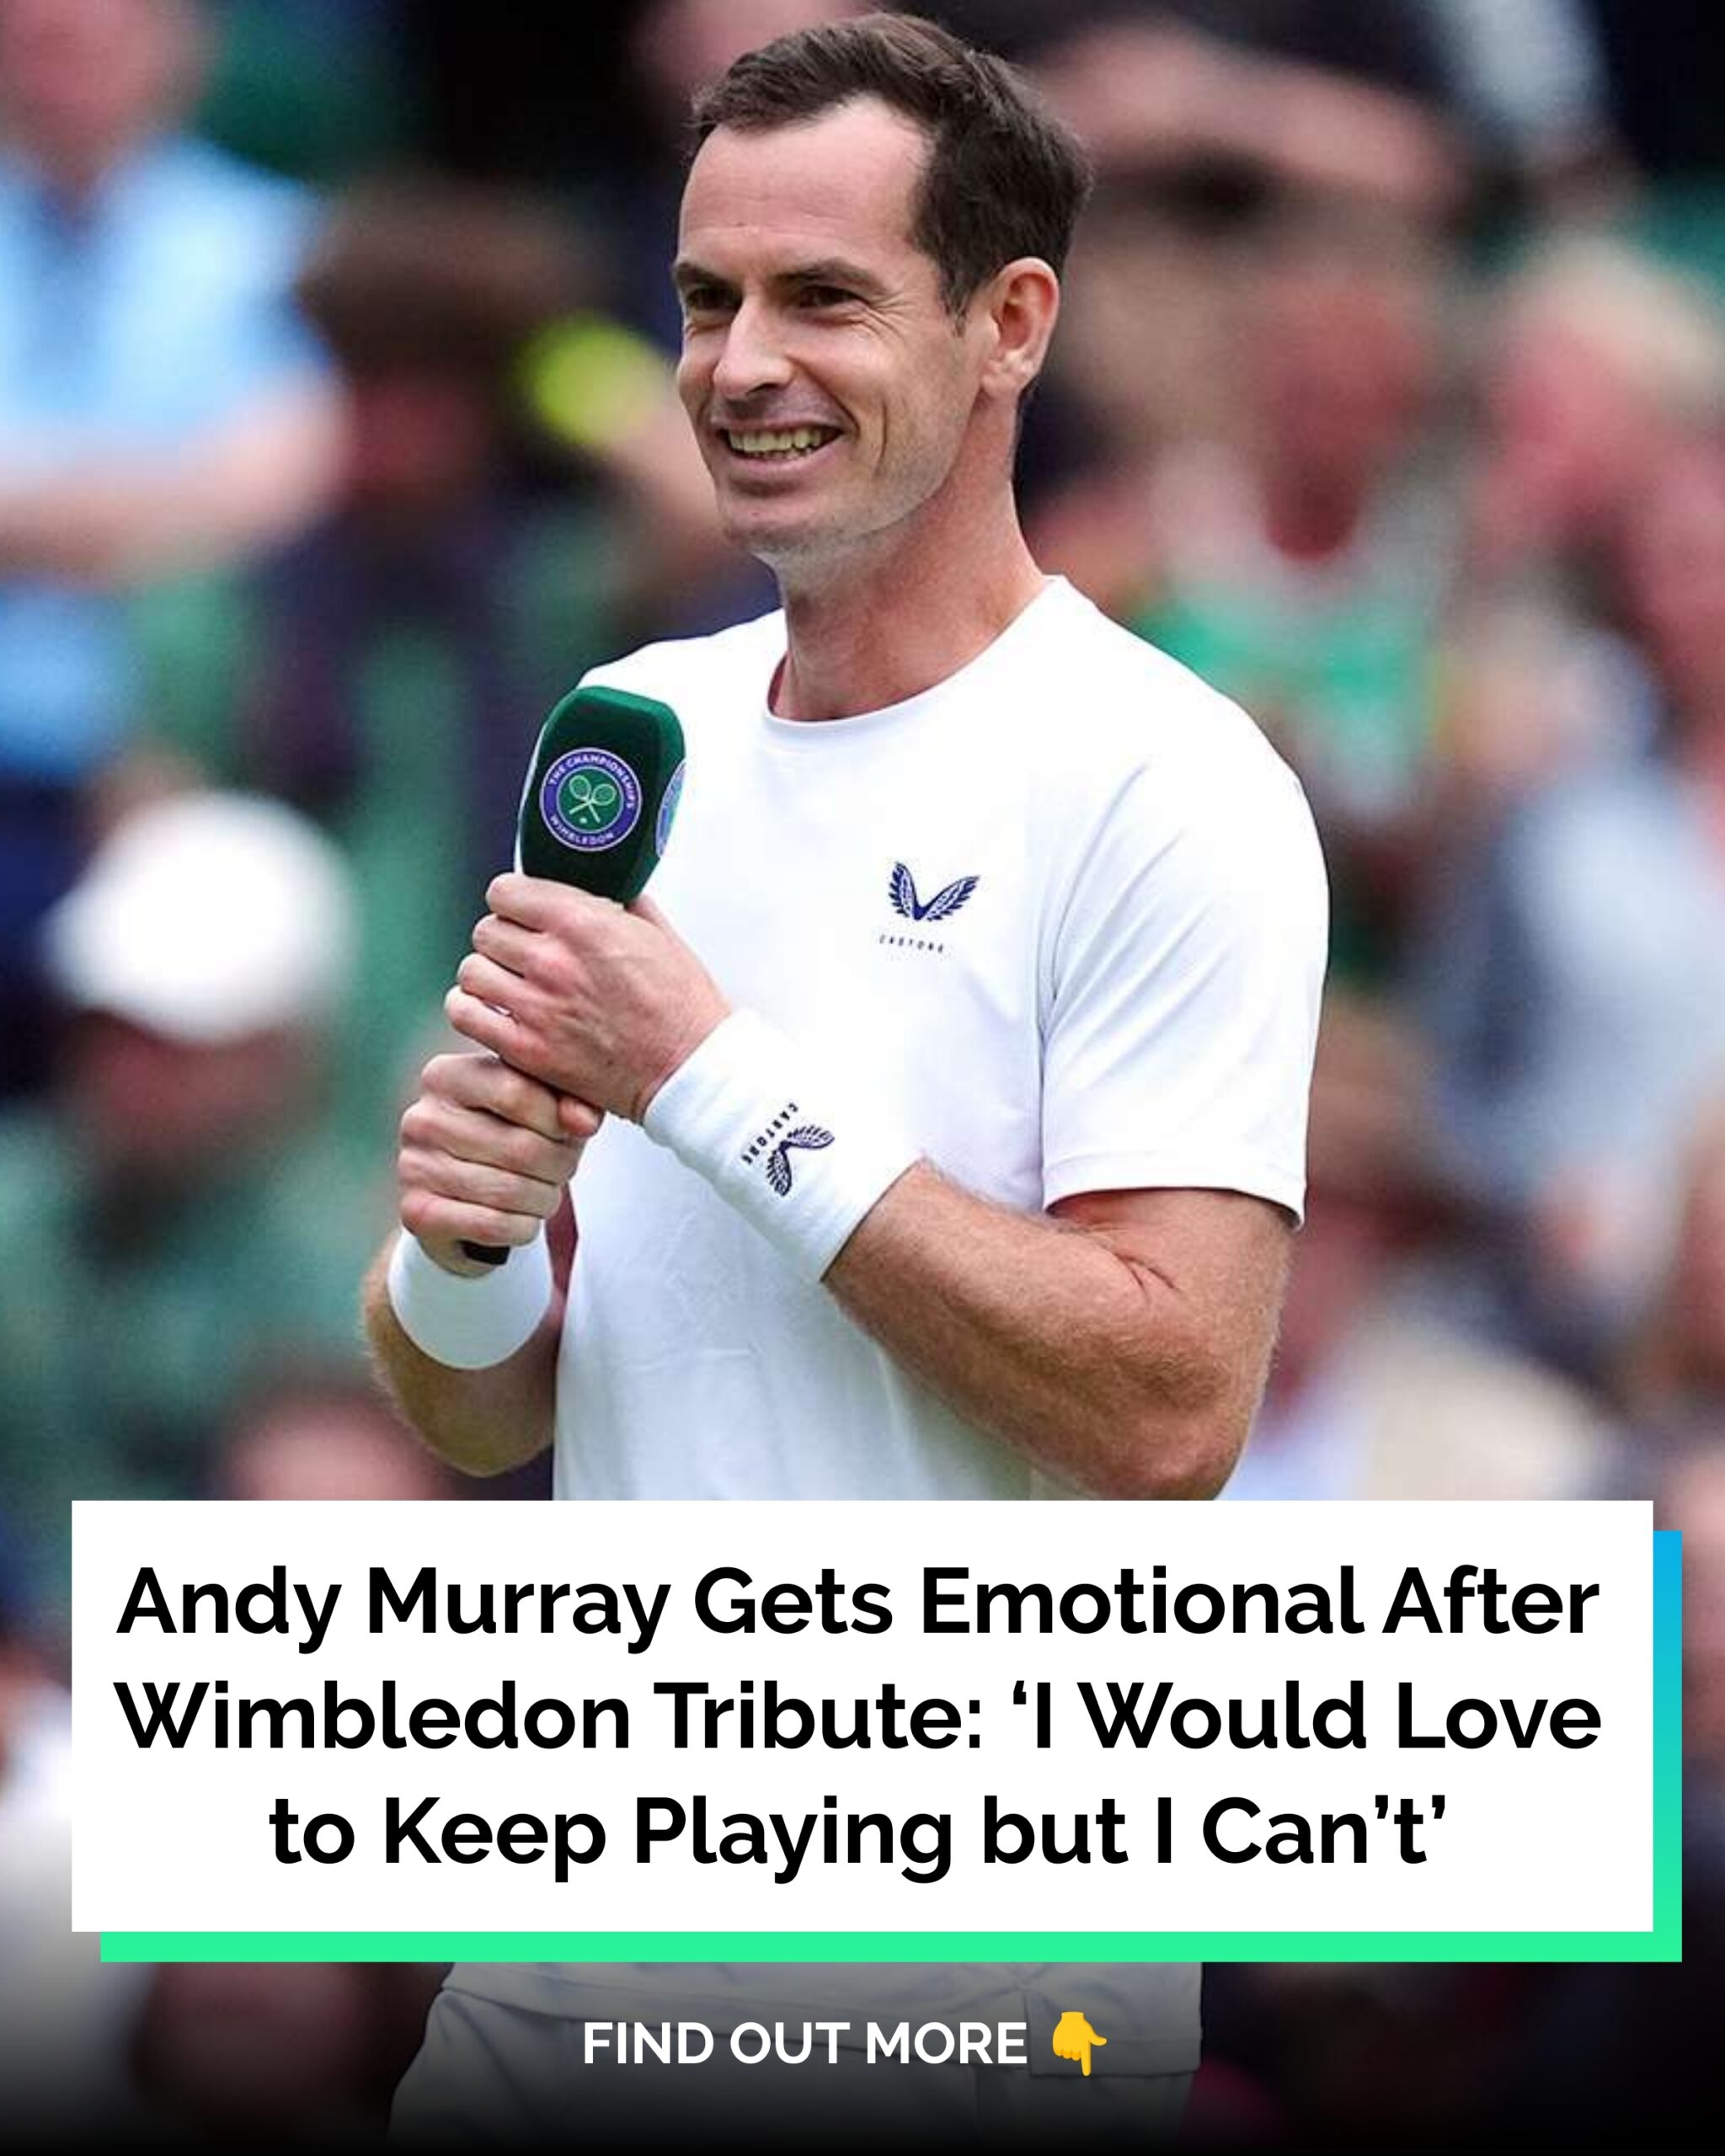 Andy Murray Gets Emotional After Wimbledon Tribute: ‘I Would Love to Keep Playing but I Can’t’